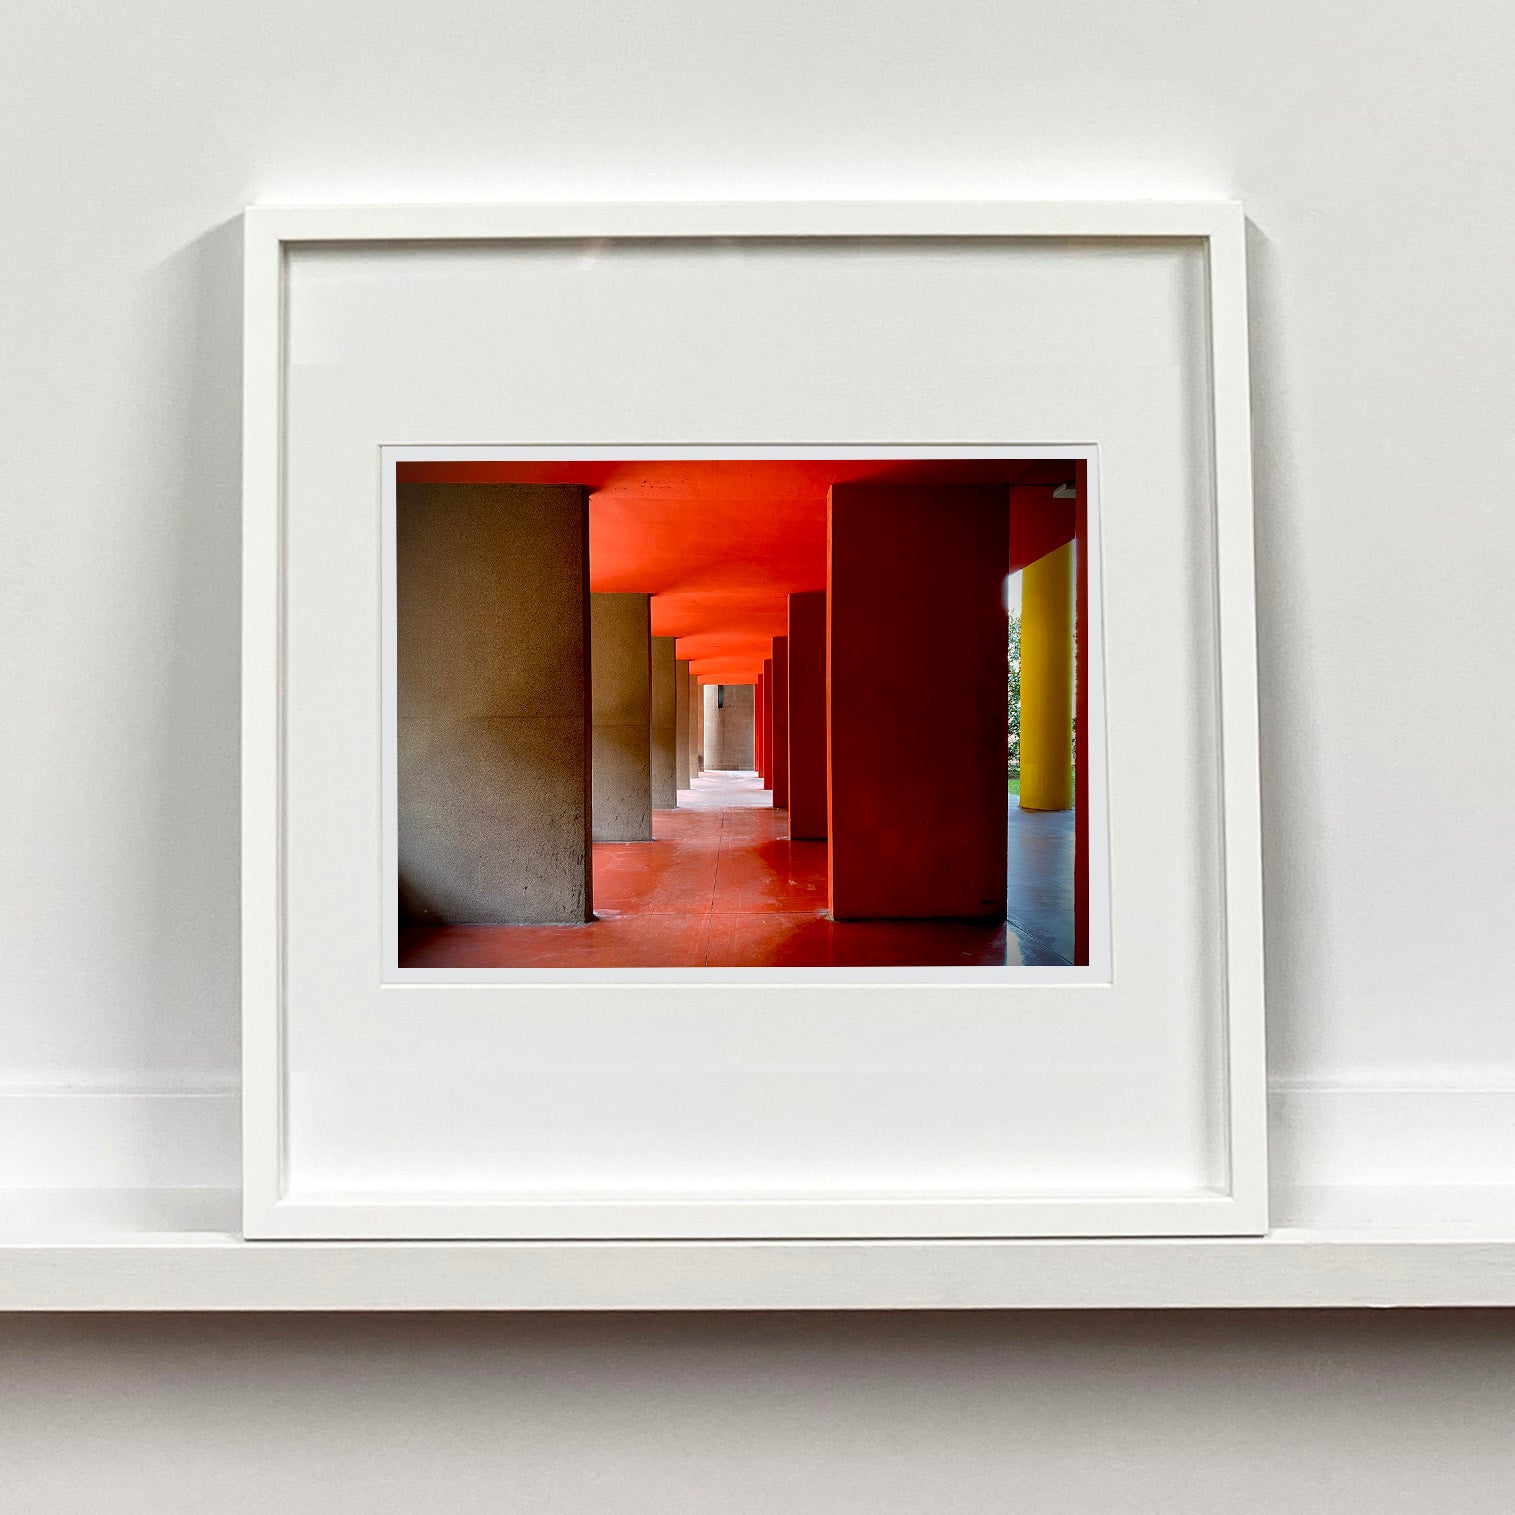 Red and yellow brutalist concrete architecture photograph by Richard Heeps framed in white.